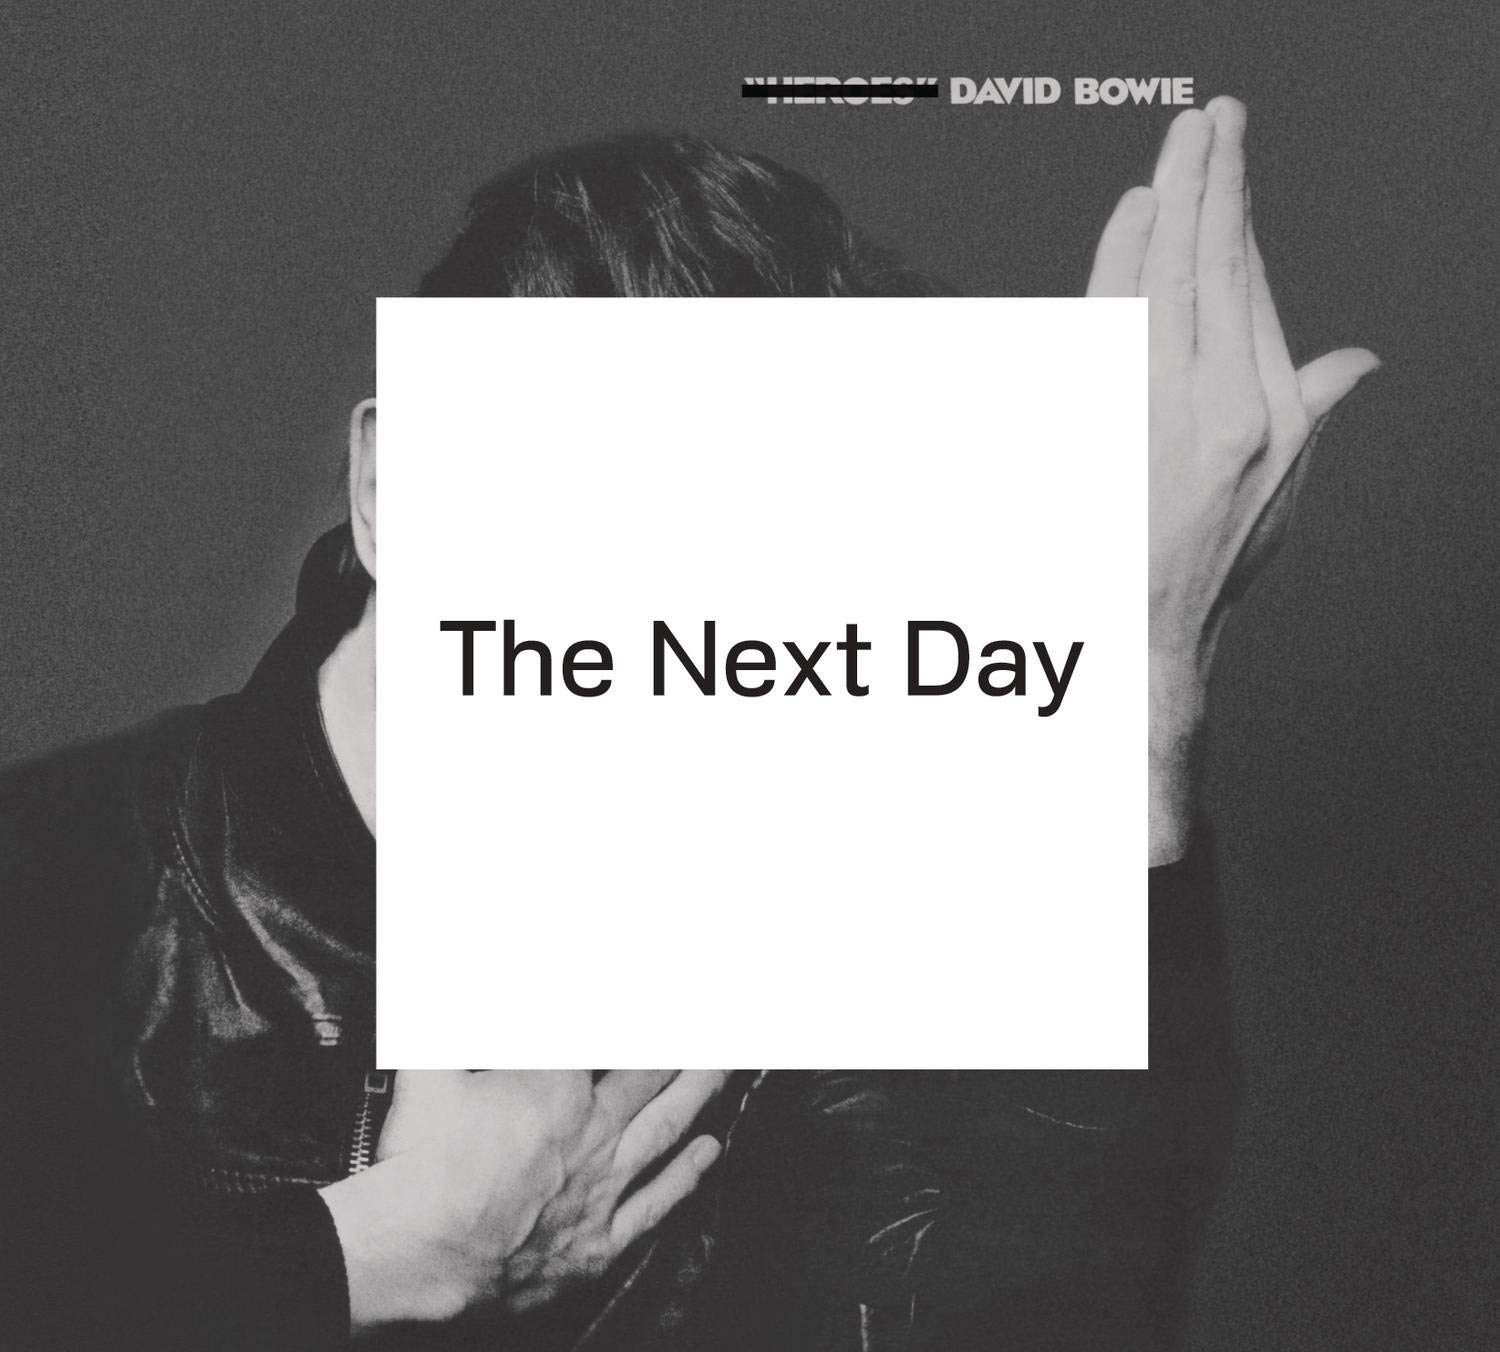 'The Next Day' - David Bowie